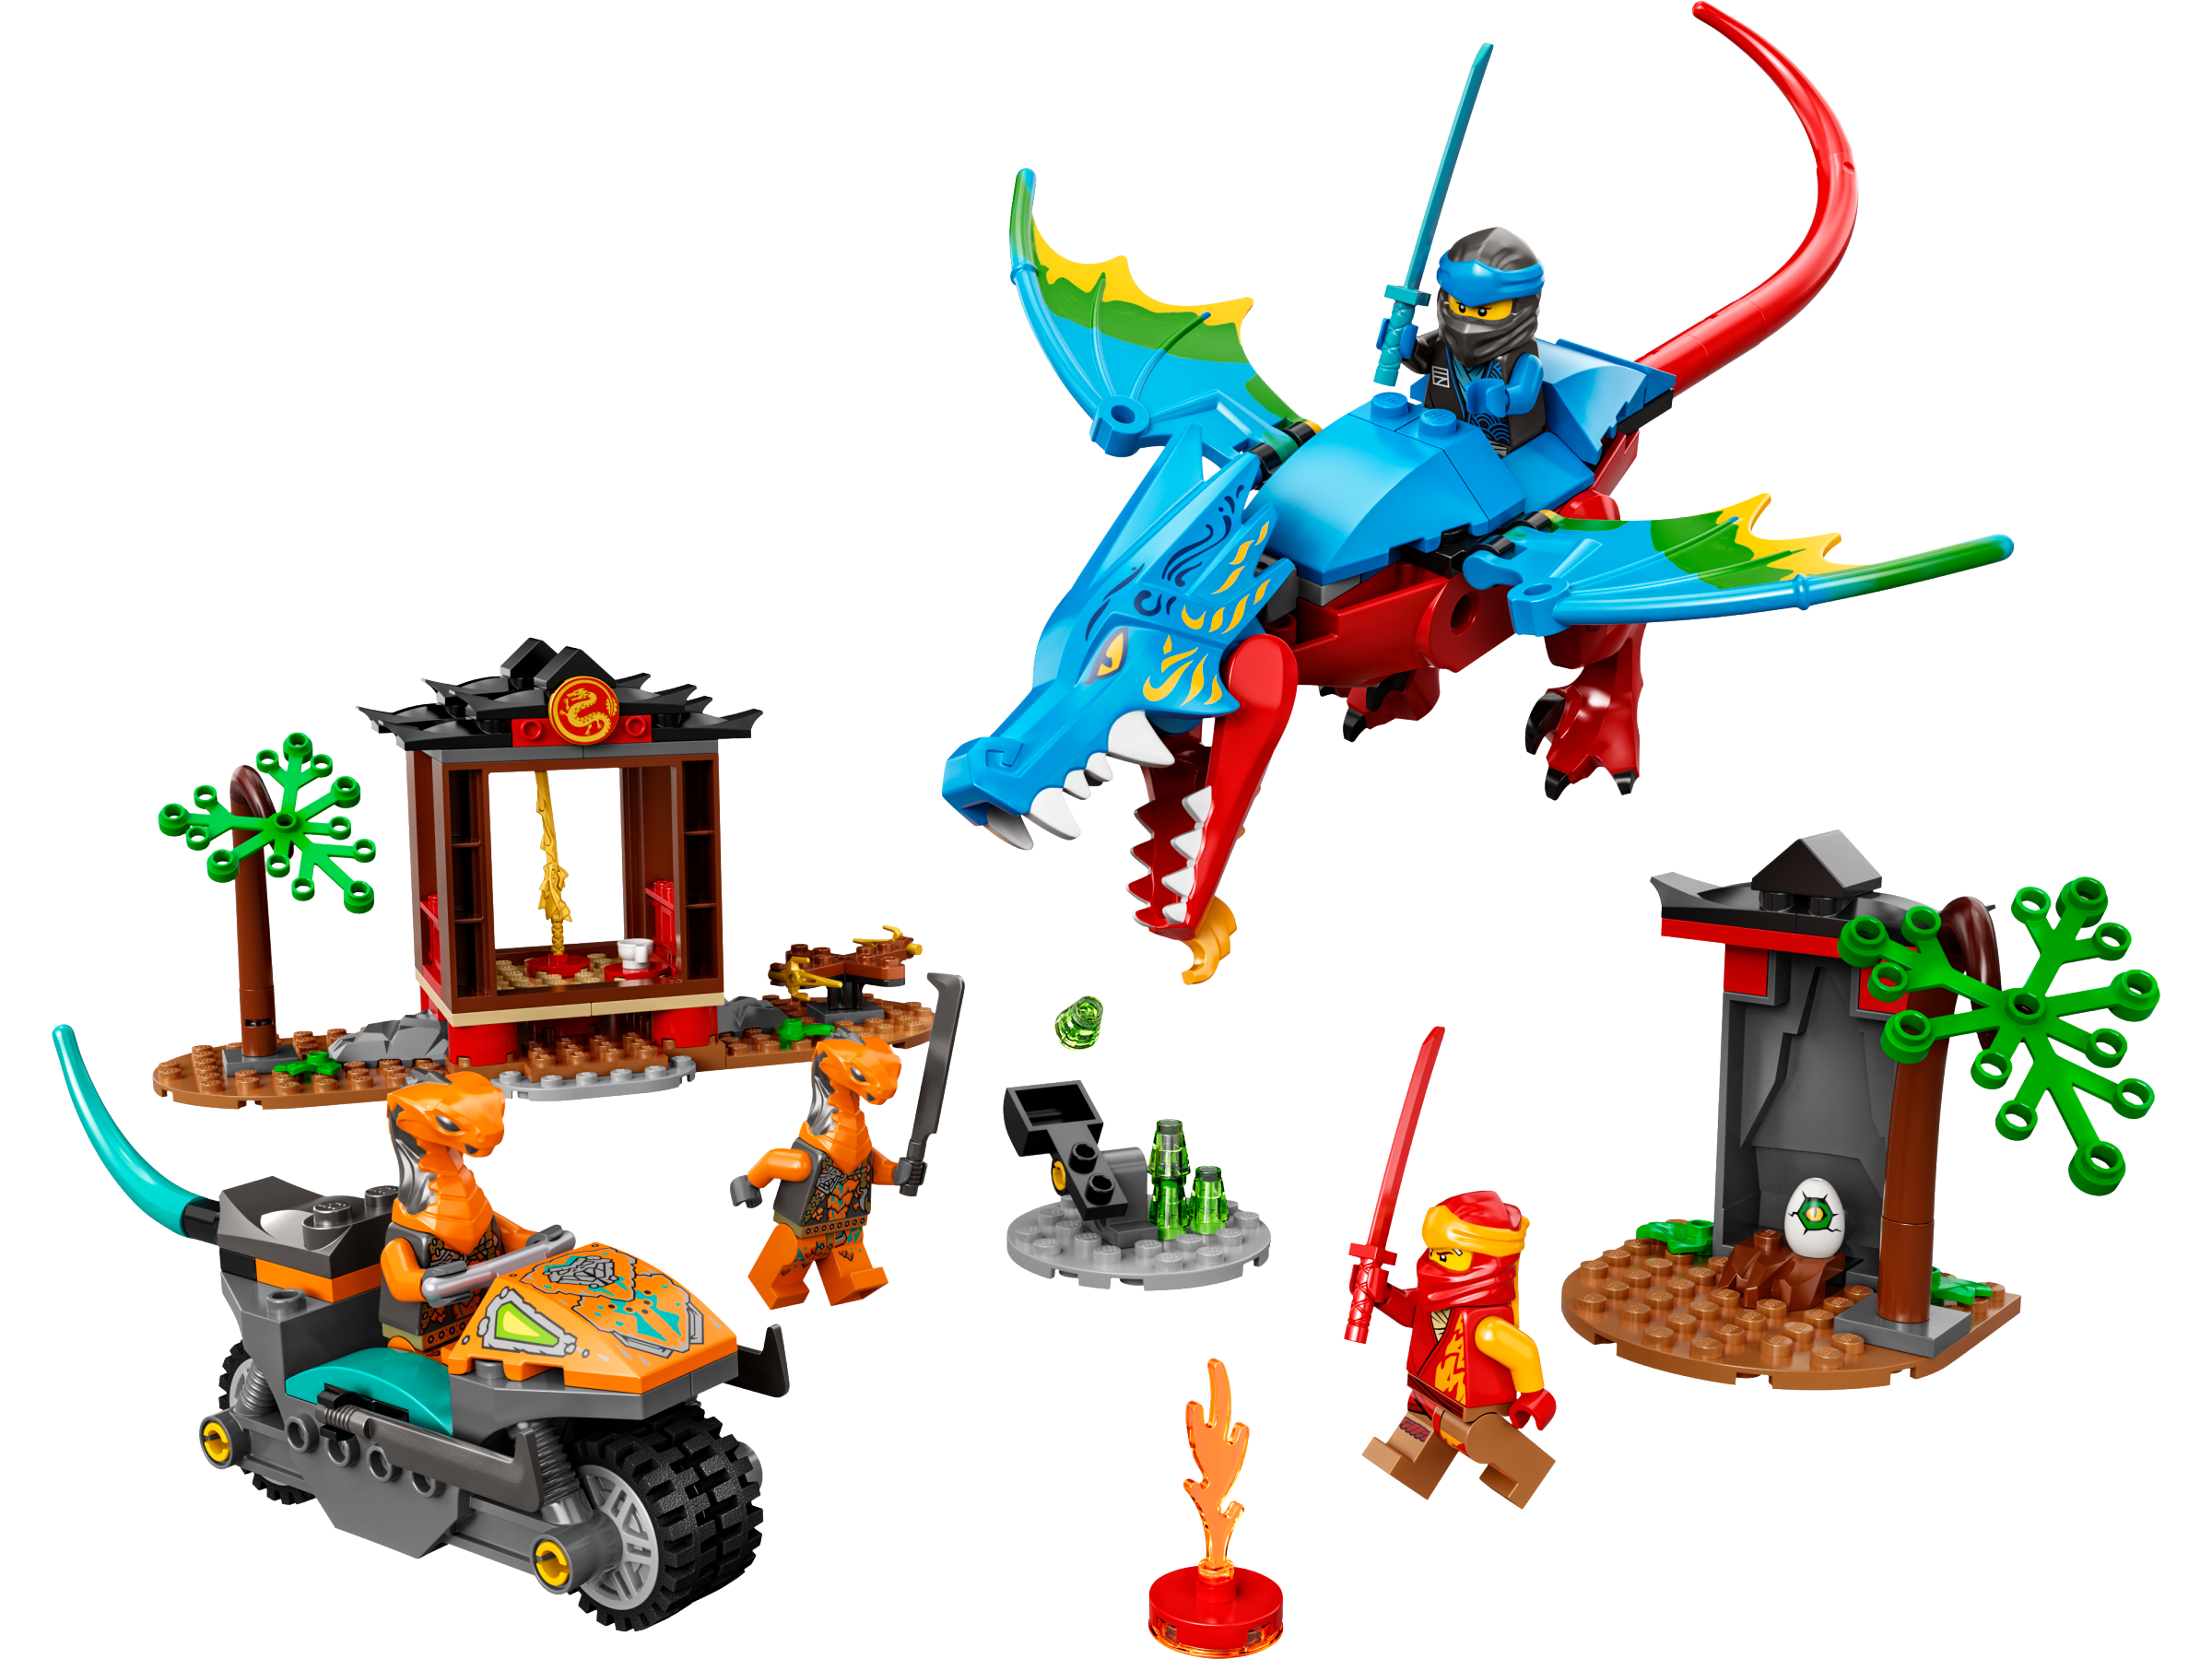 Ninjago Egalt the Master Dragon - A2Z Science & Learning Toy Store